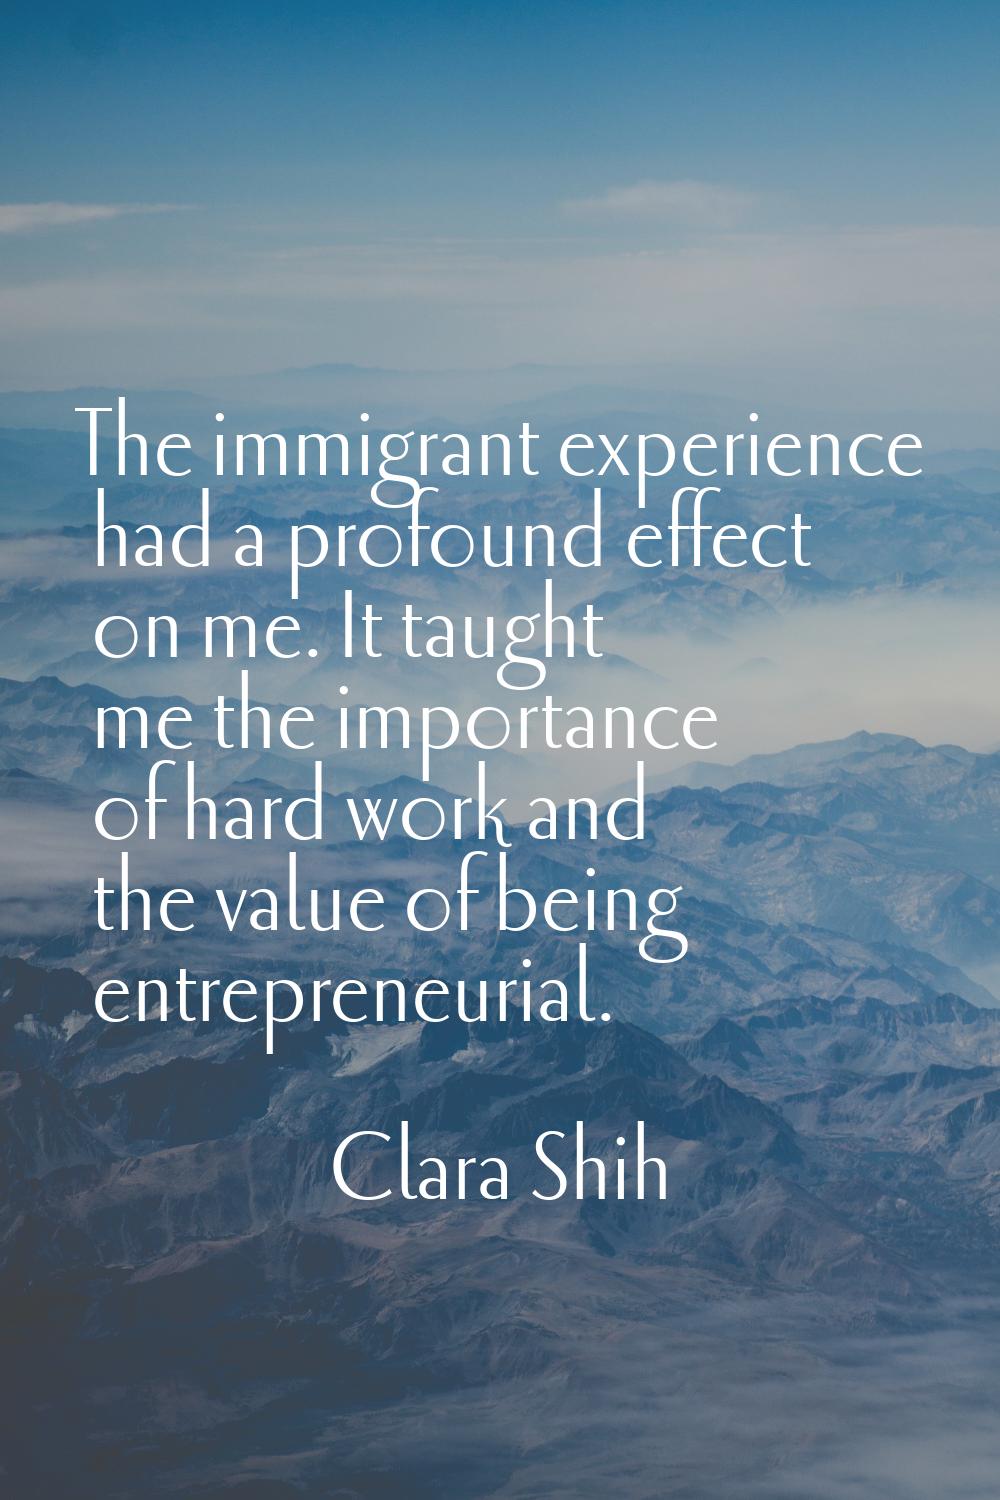 The immigrant experience had a profound effect on me. It taught me the importance of hard work and 